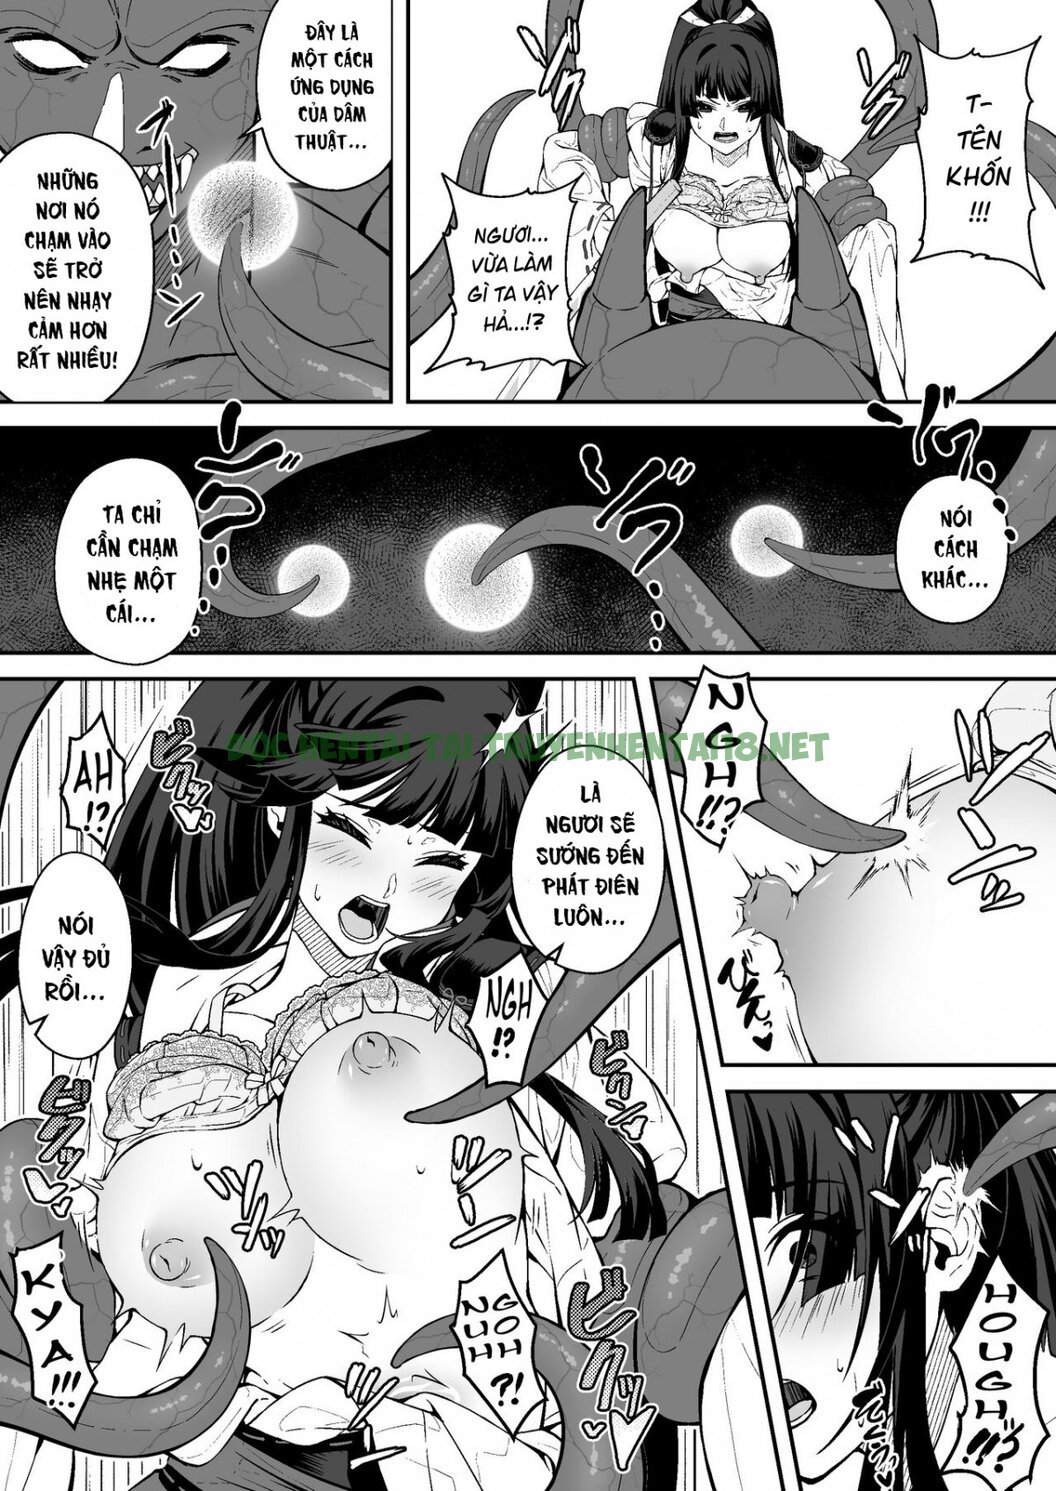 Hình ảnh 28 trong The Master Demon Exorcist Doesn't Succumb To Tentacle Demon - One Shot